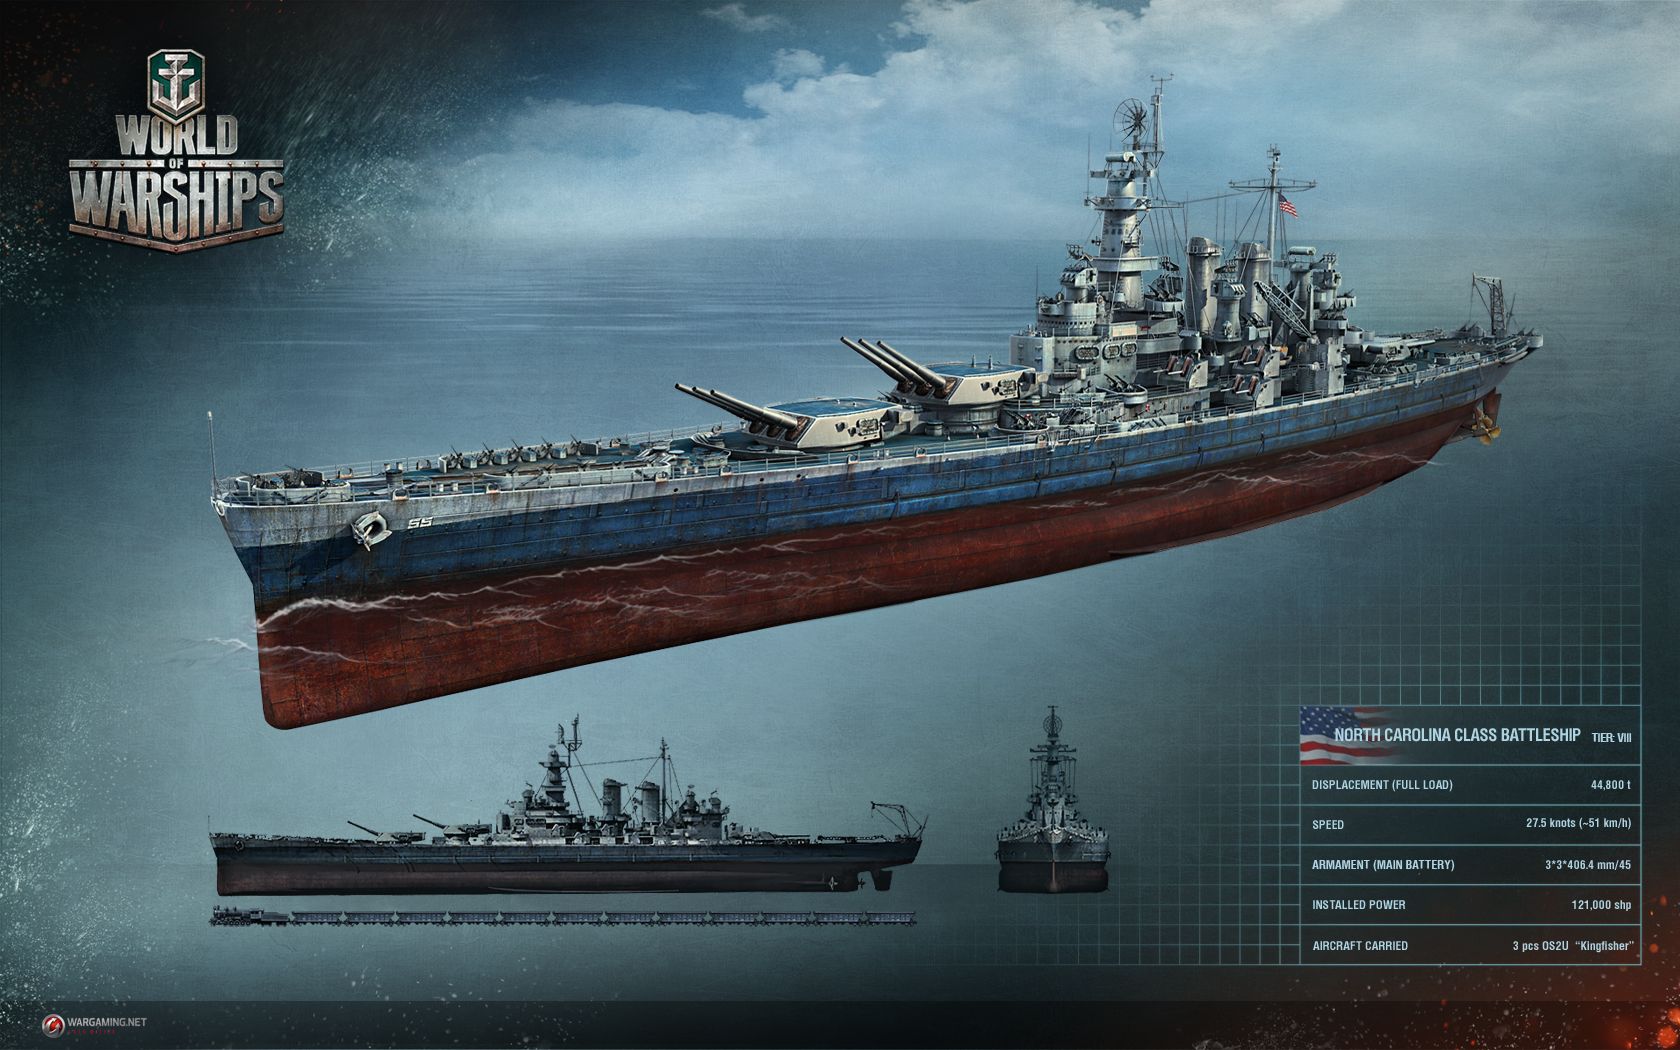 Uss North Carolina Announcements World Of Warships Official Forum